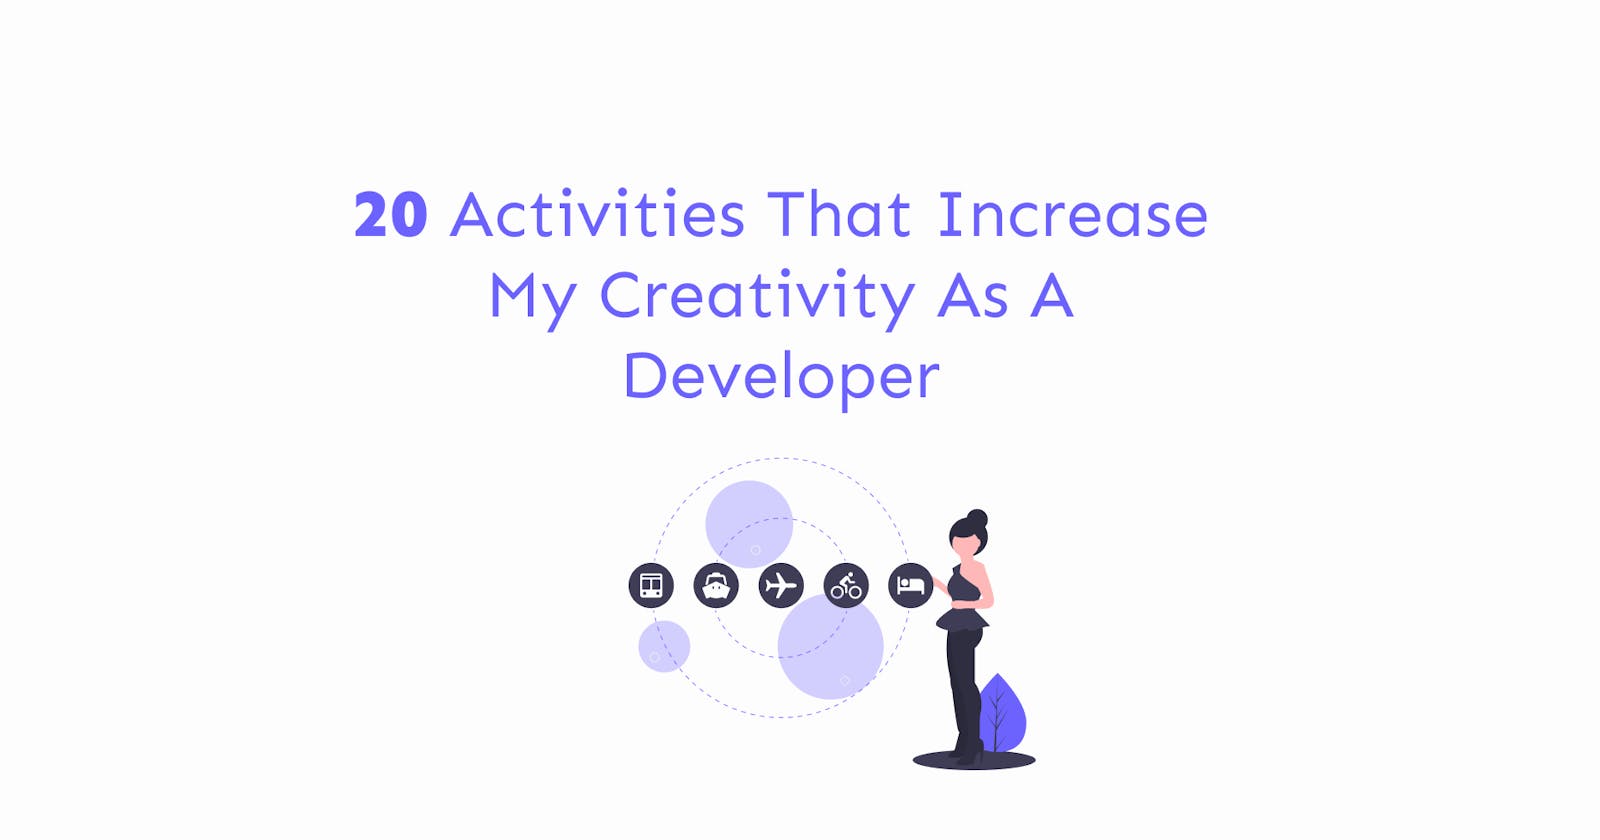 20 activities that increase my creativity as a developer